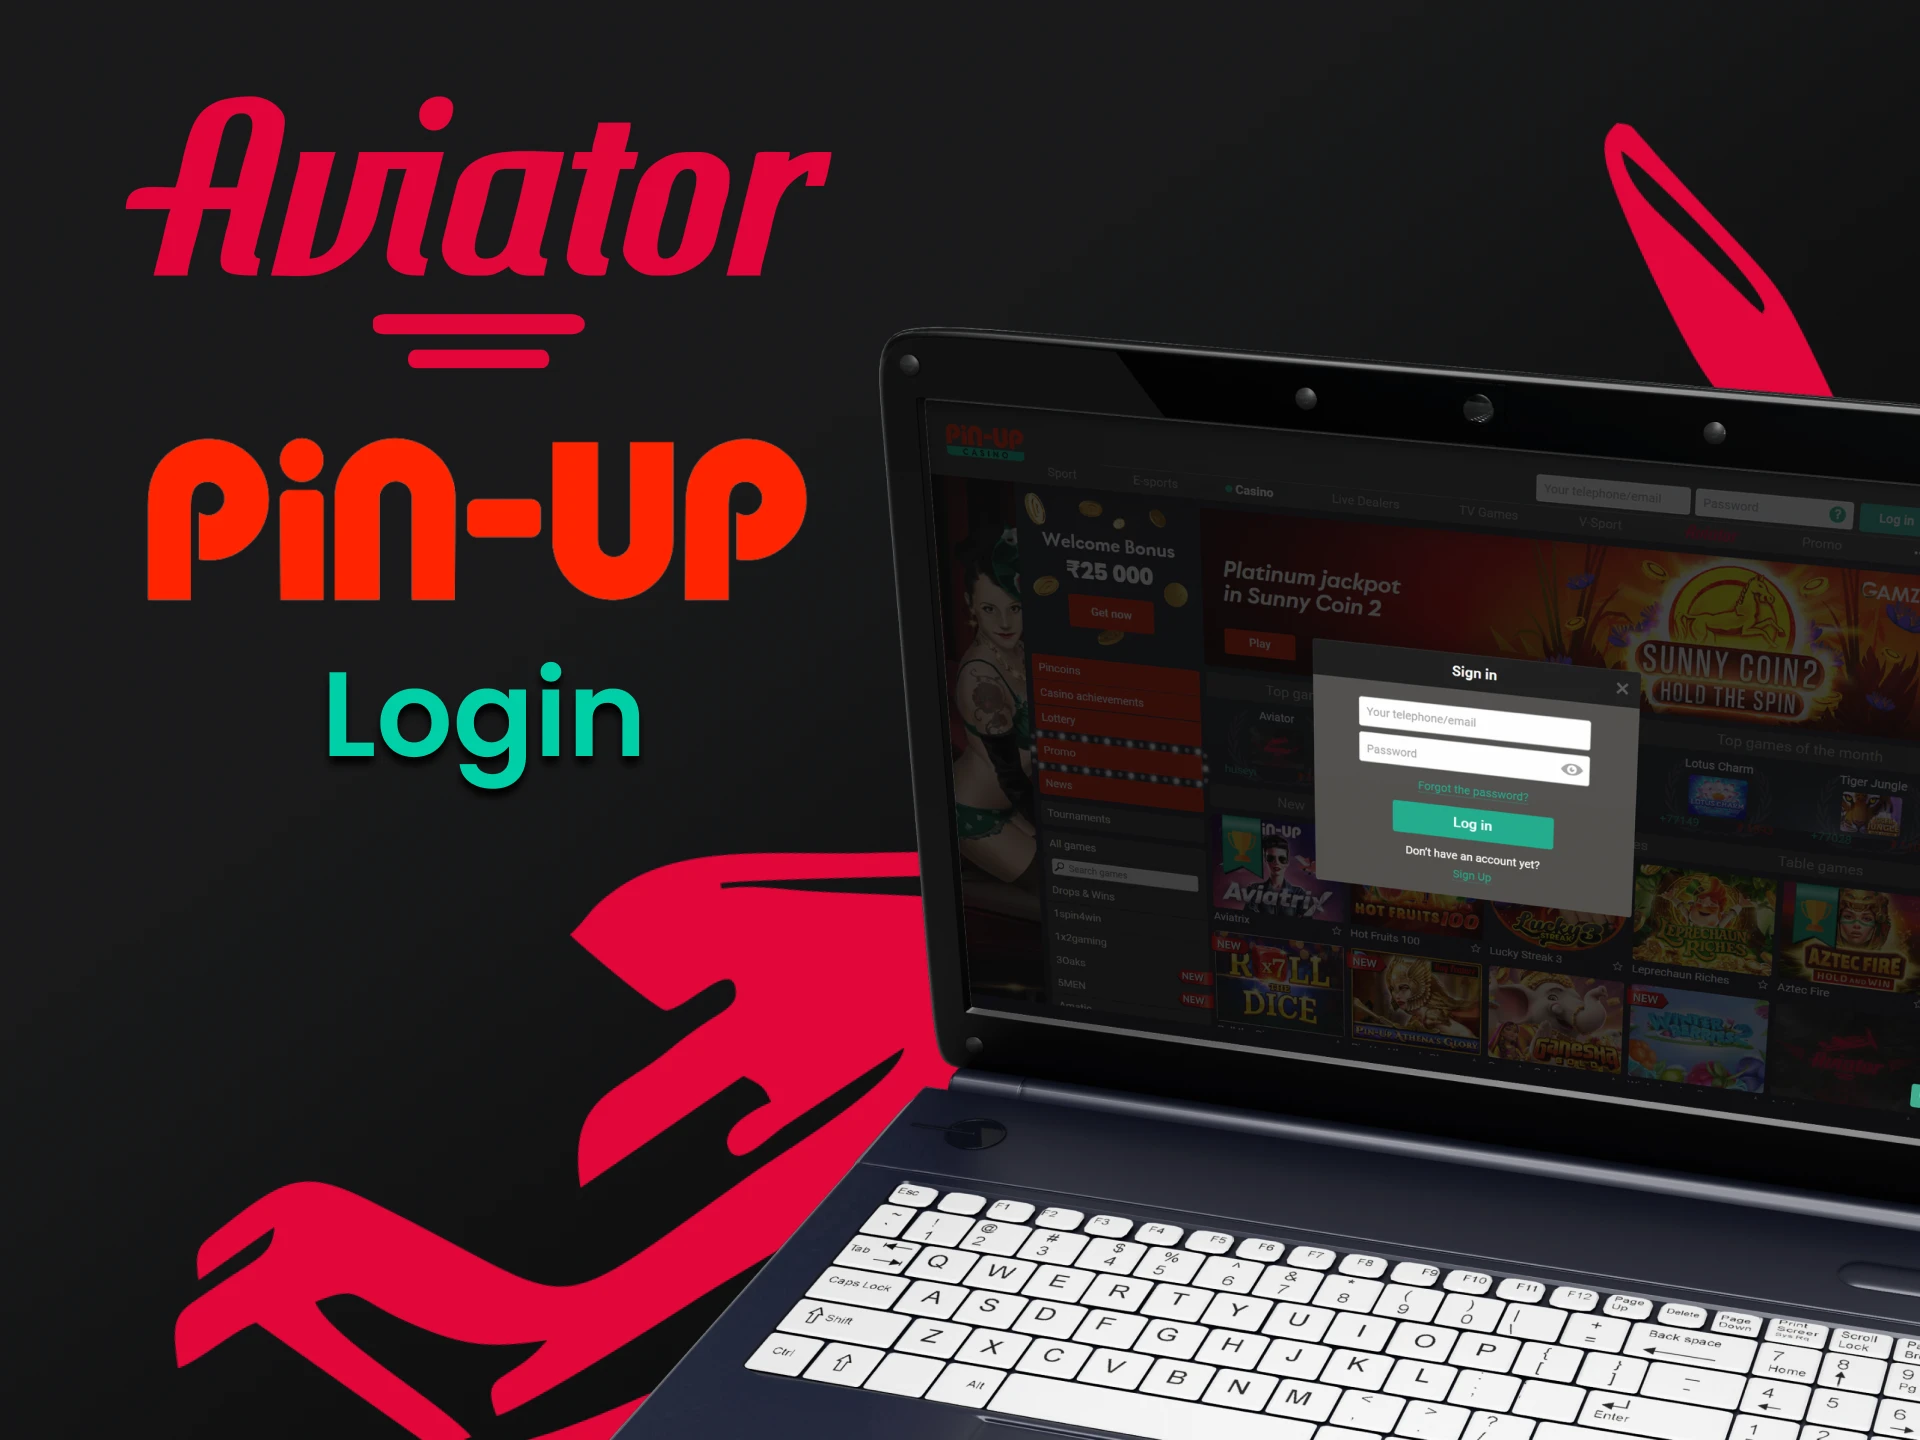 Login to your personal account to start playing Aviator on Pin Up.